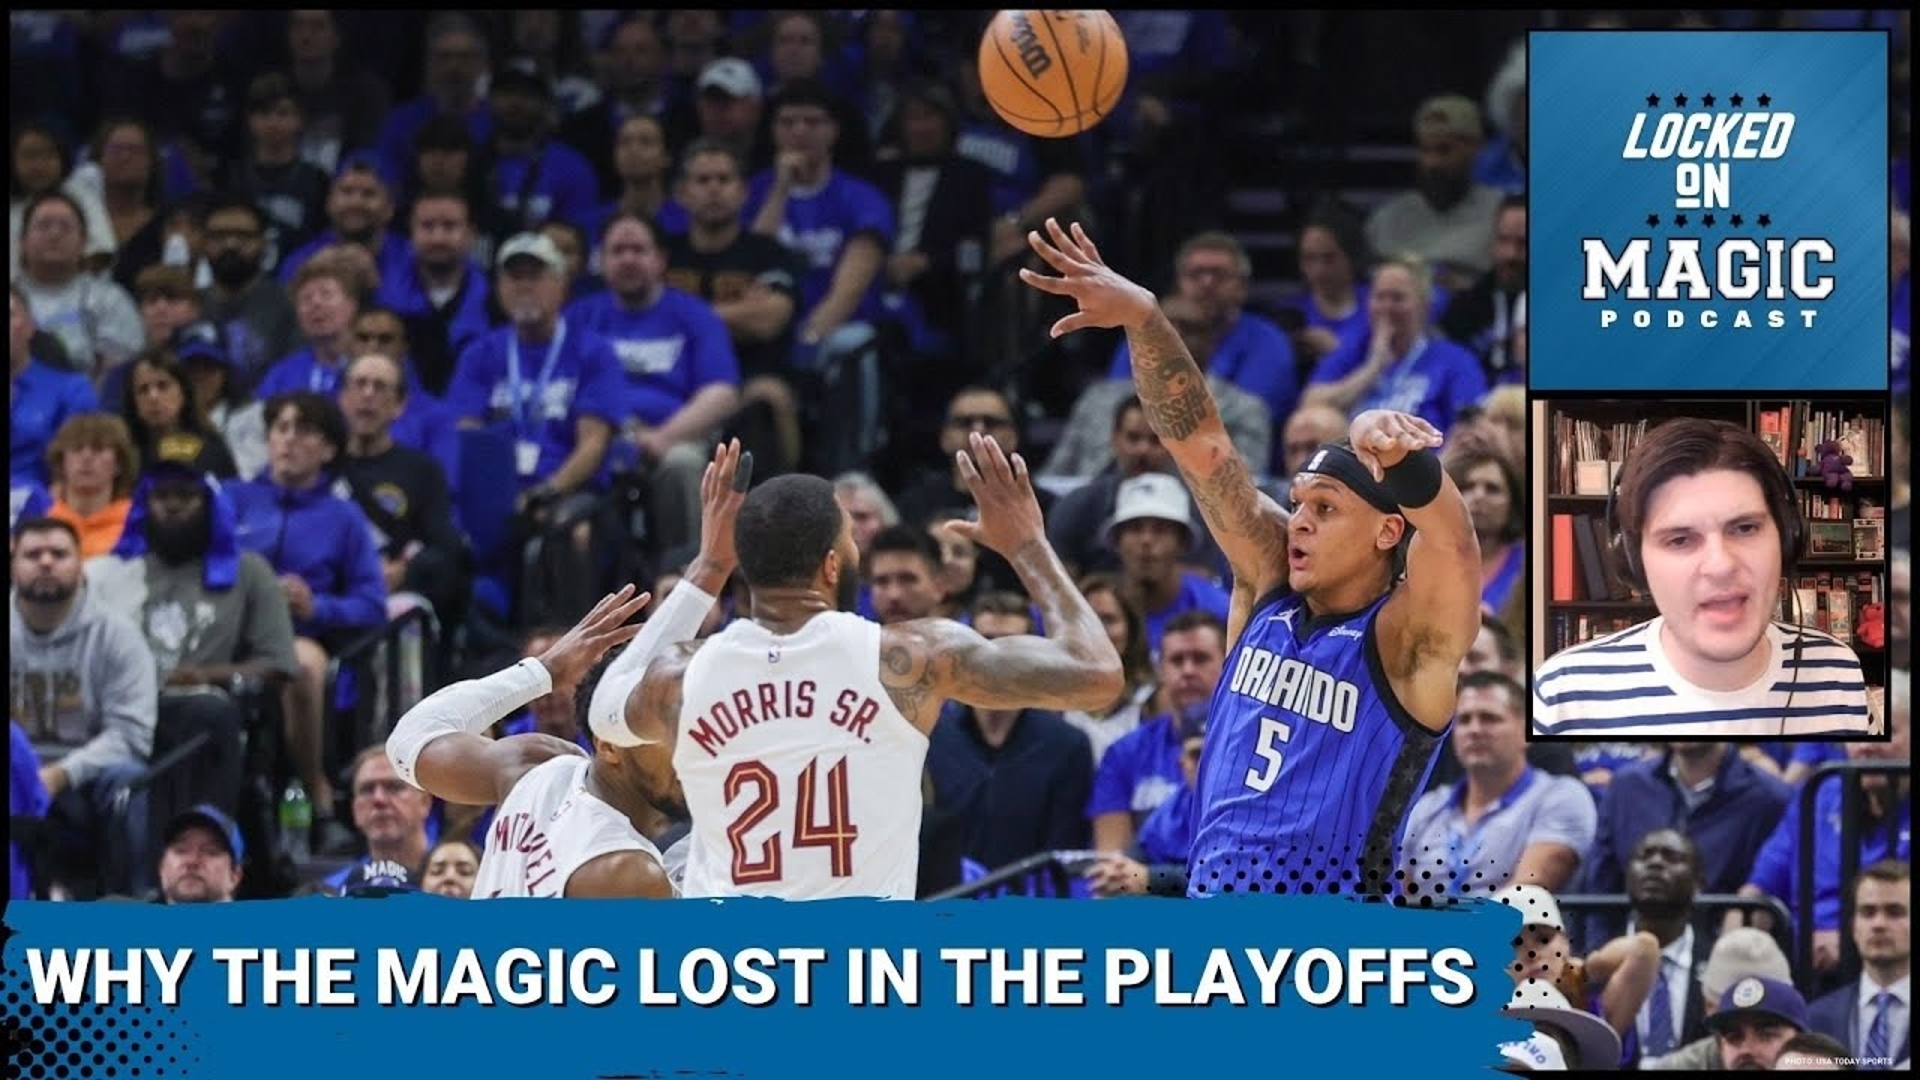 Before we can focus on the Orlando Magic's future, we have to examine why they lost in the Playoffs.